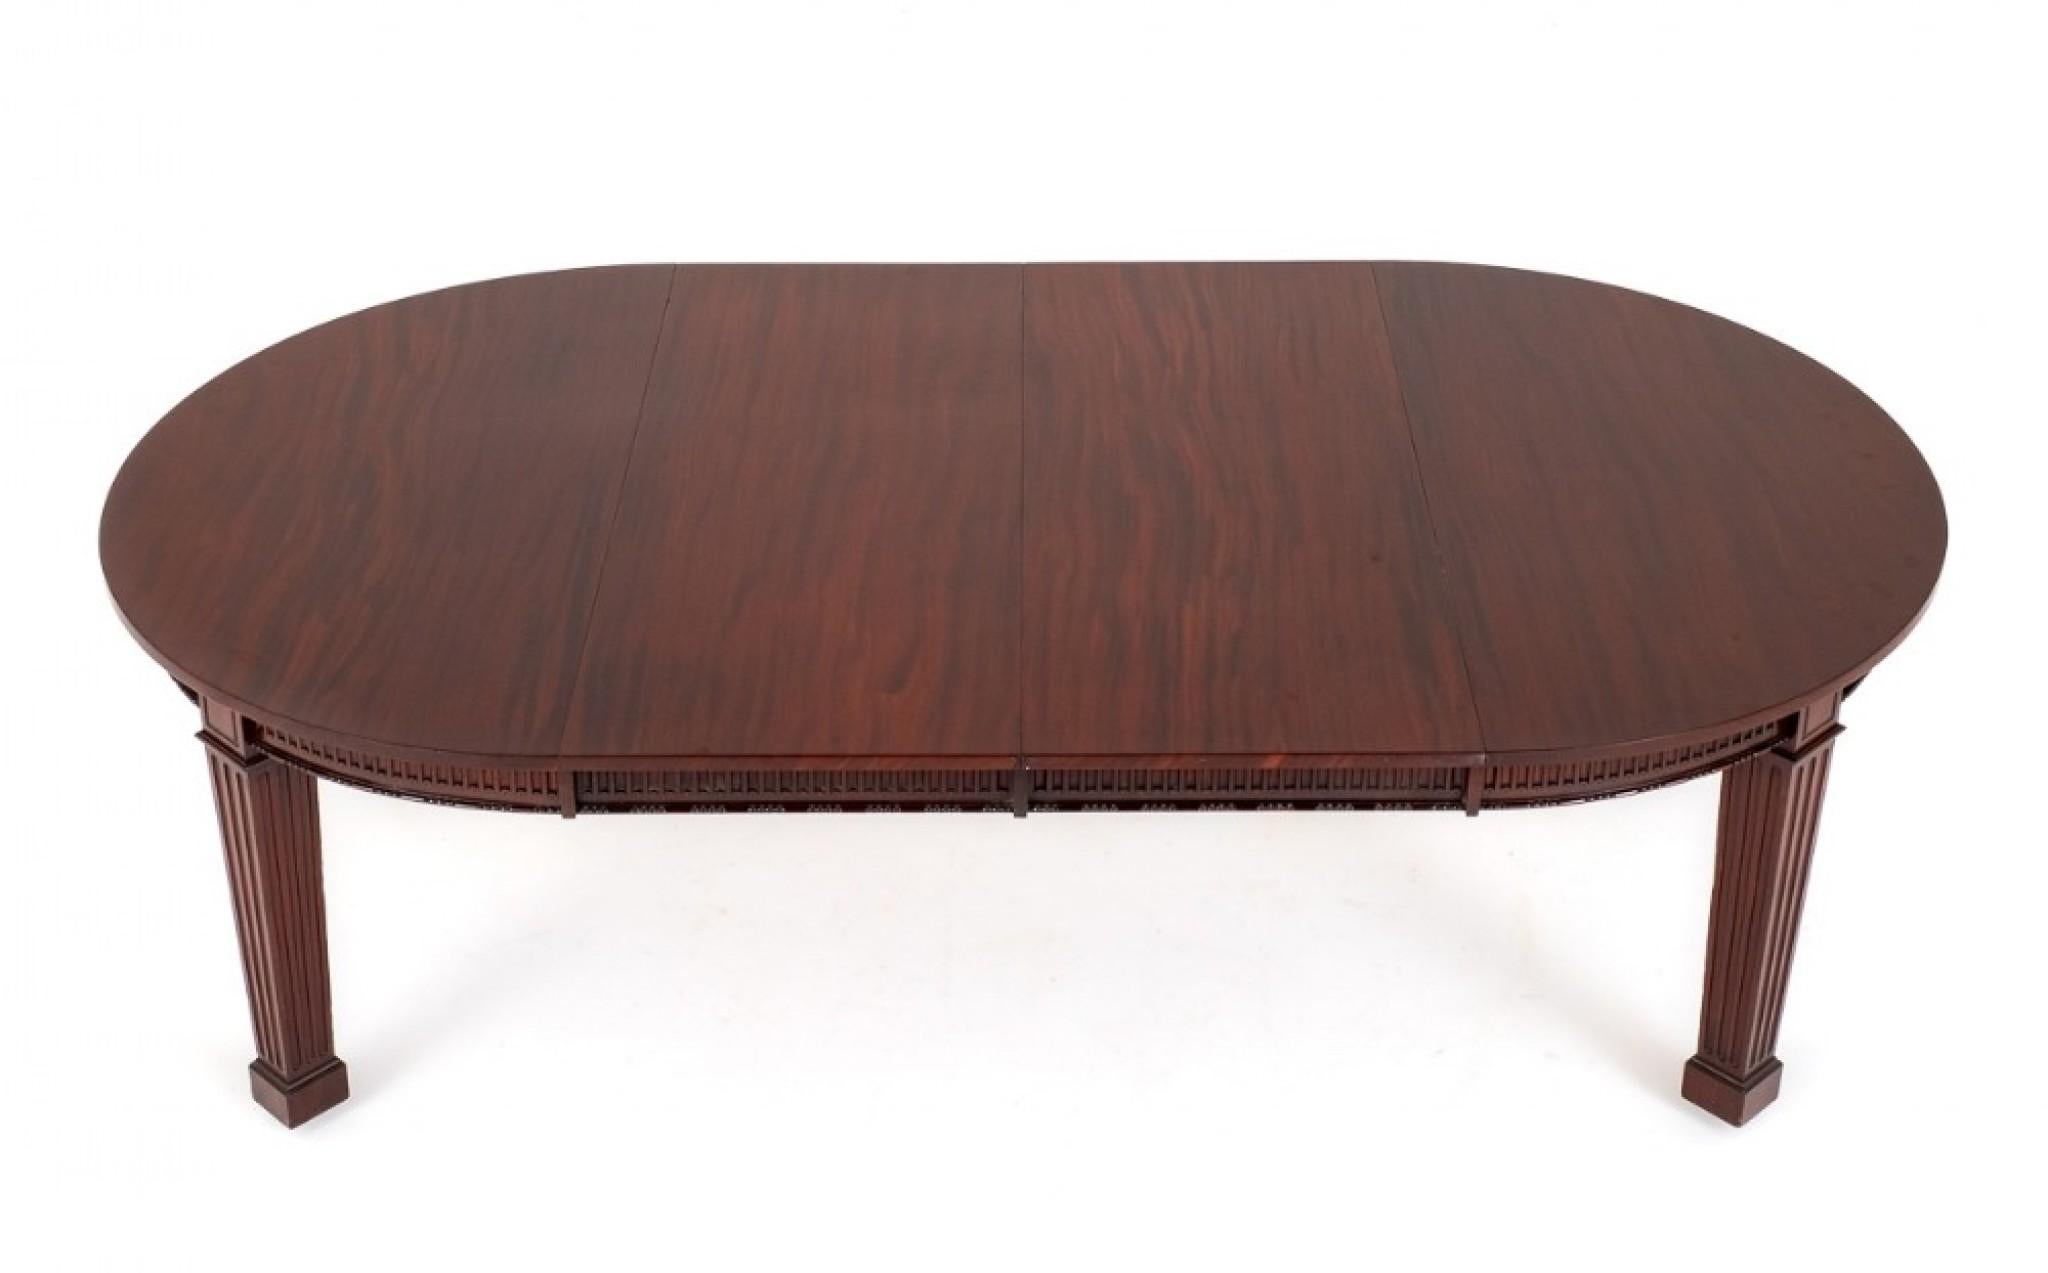 18th Century and Earlier Period Victorian Dining Table Extending Mahogany 2 Leaf